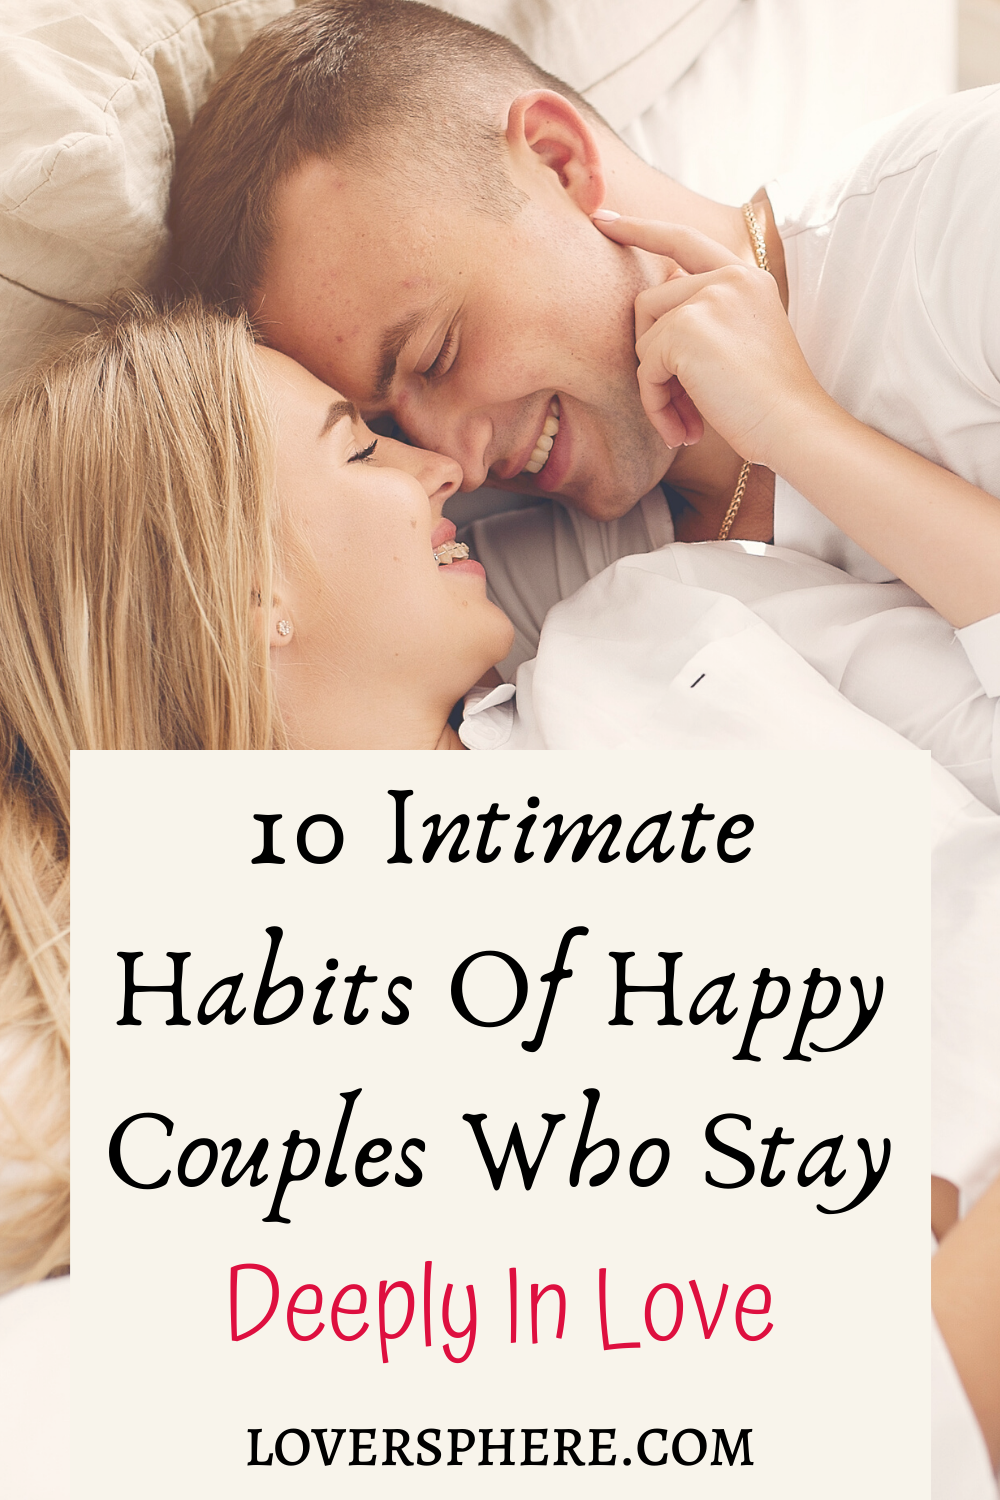 Intimate Habits Of Happy Couples Who Stay Deeply In Love